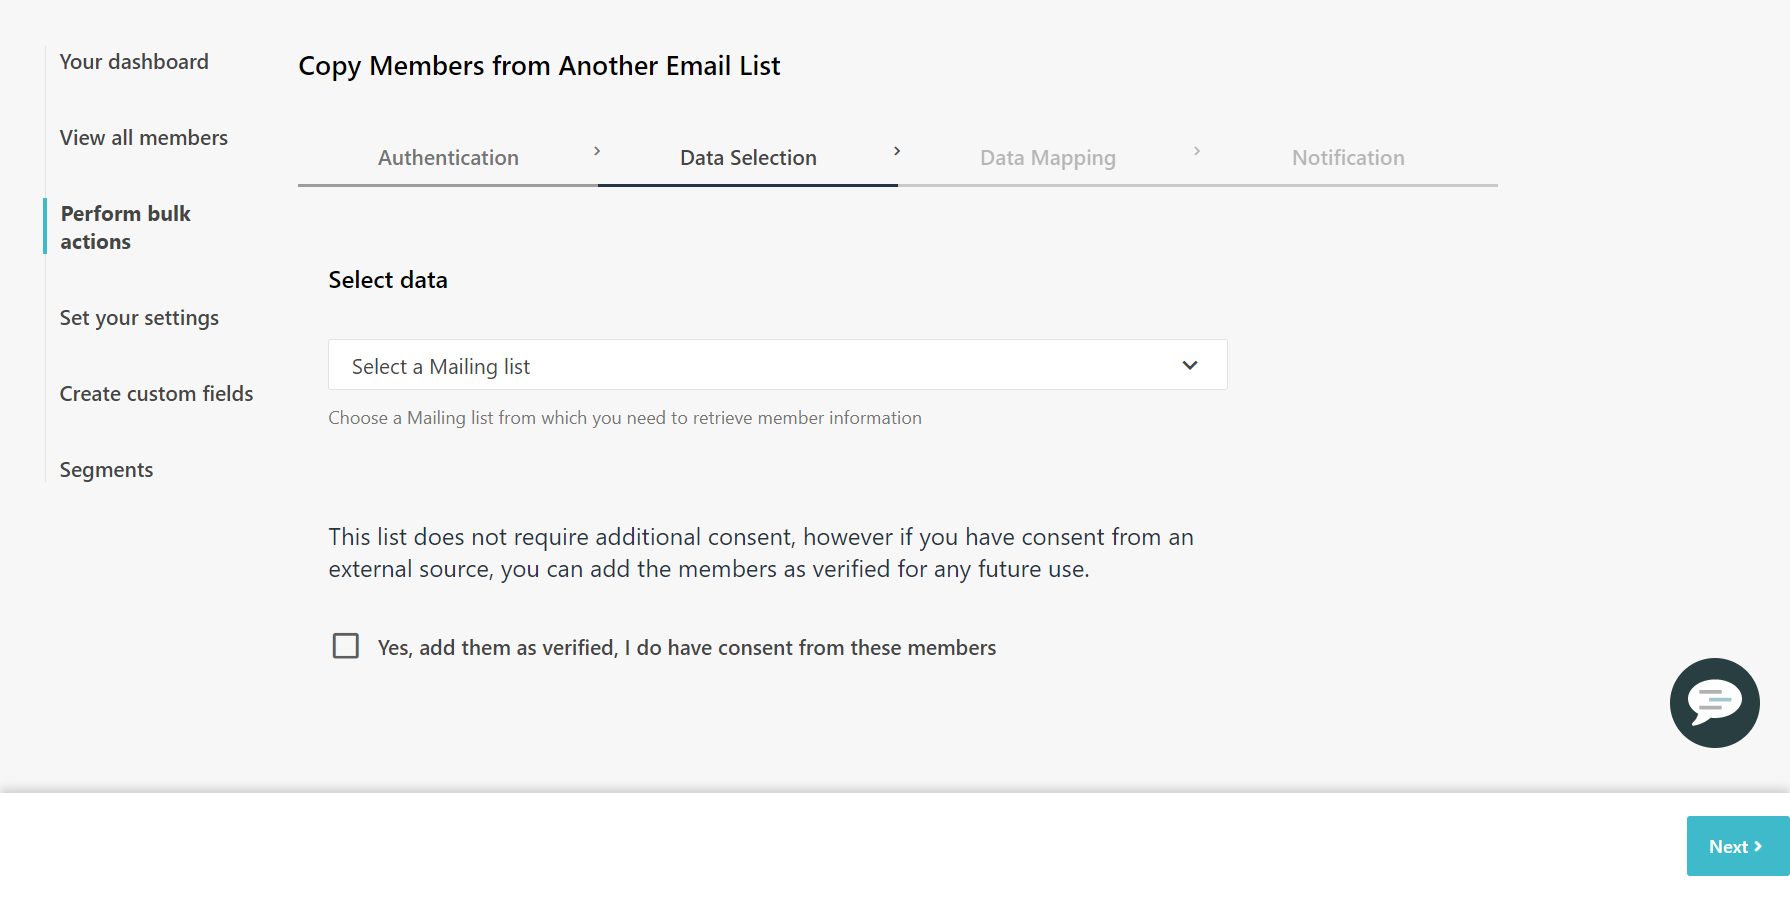 Data selection tab in the Copy Members from another Email list screen.